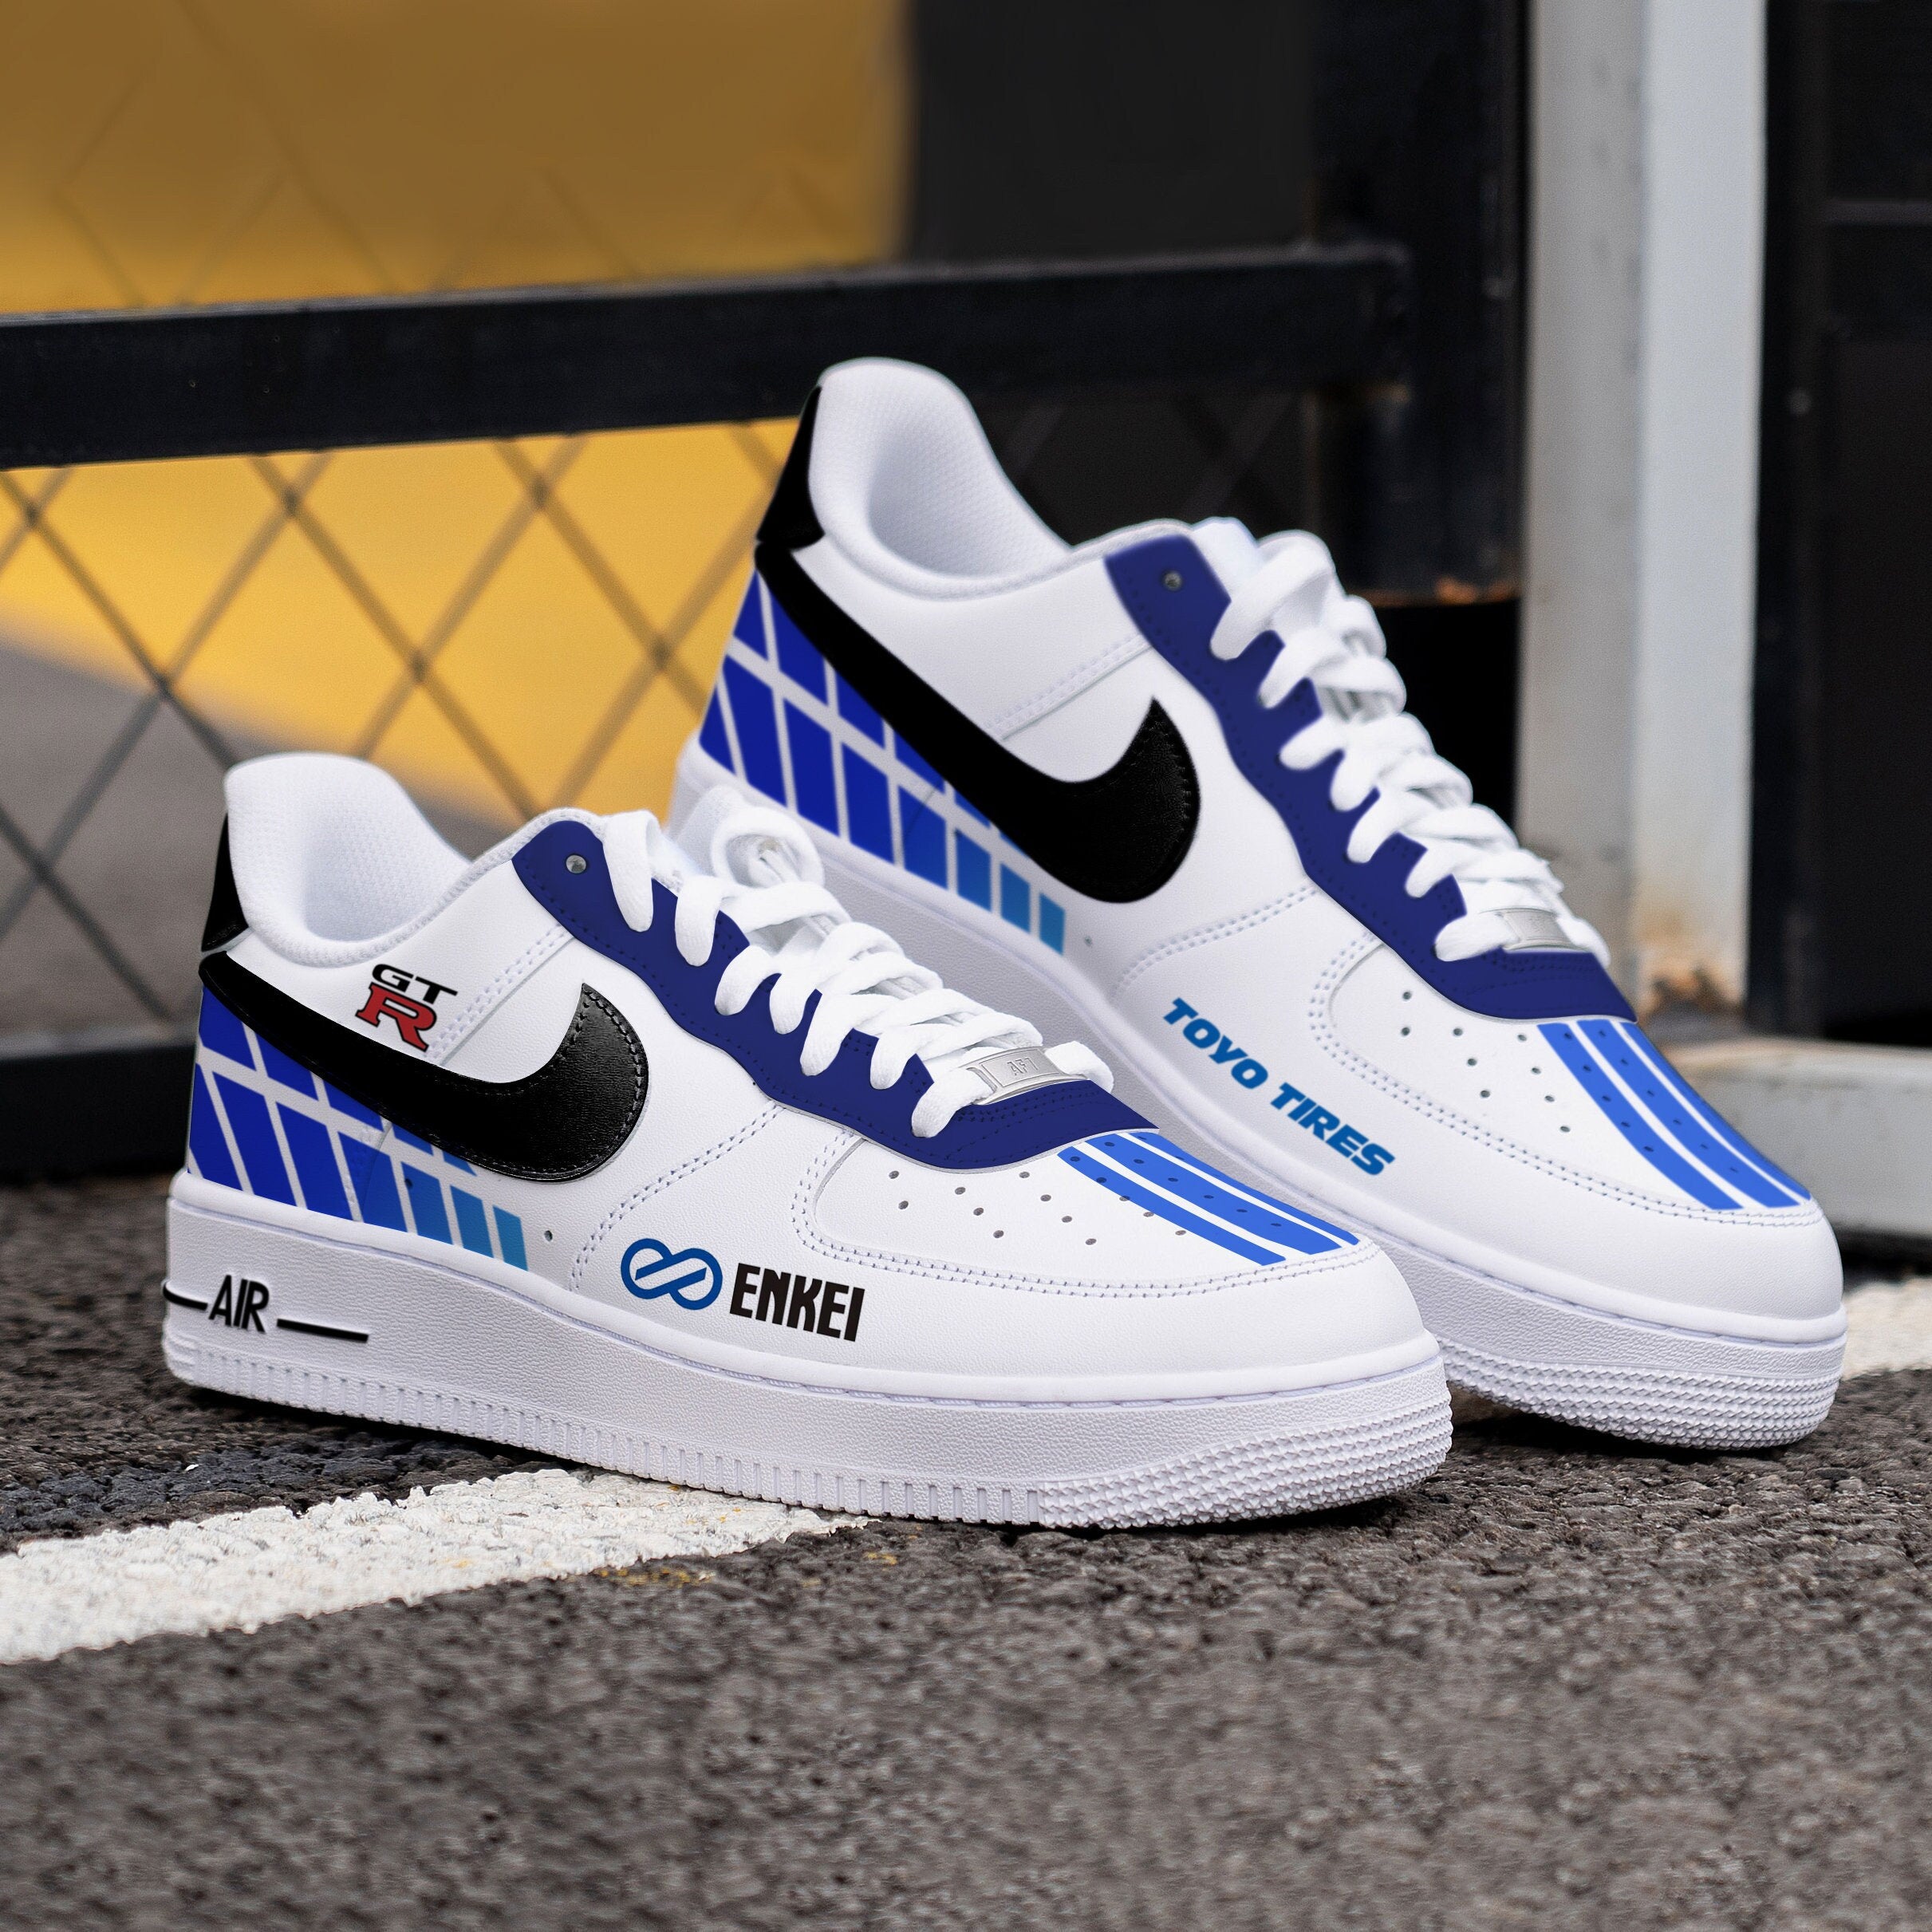 Custom Fast And Furious Nike Air Force 1 Shoes